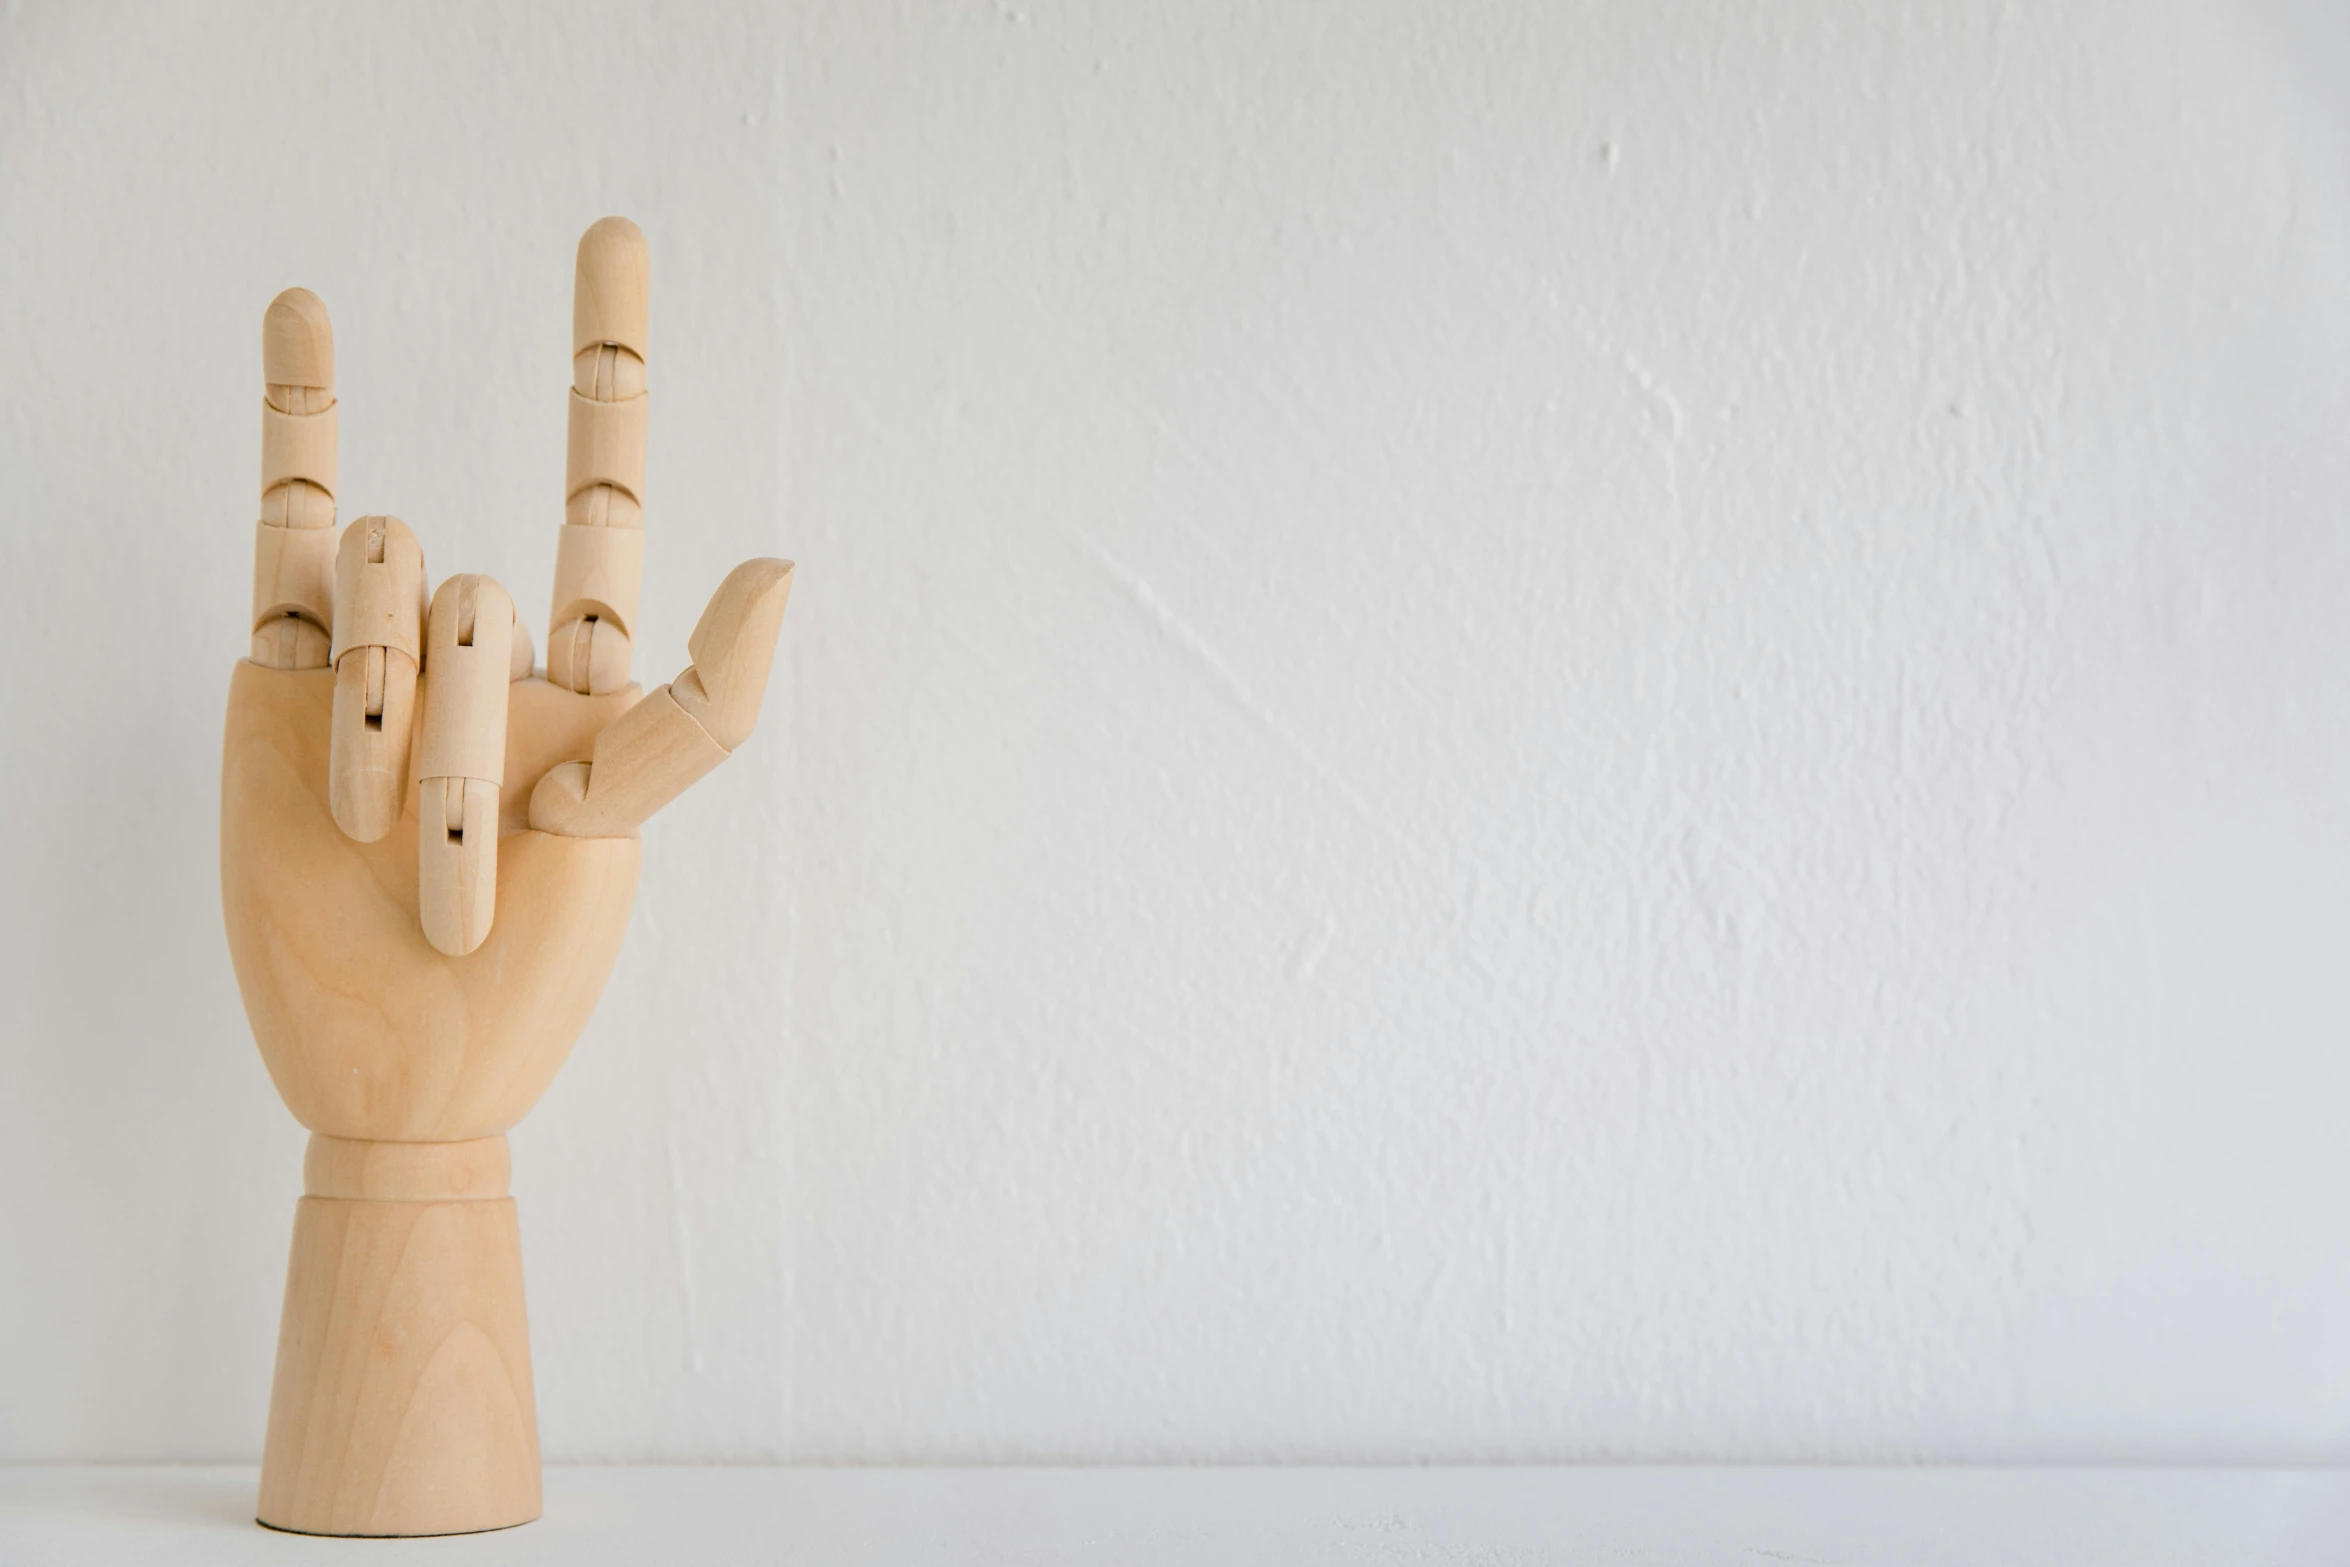 a wood toy hand with fingers showing three different ways